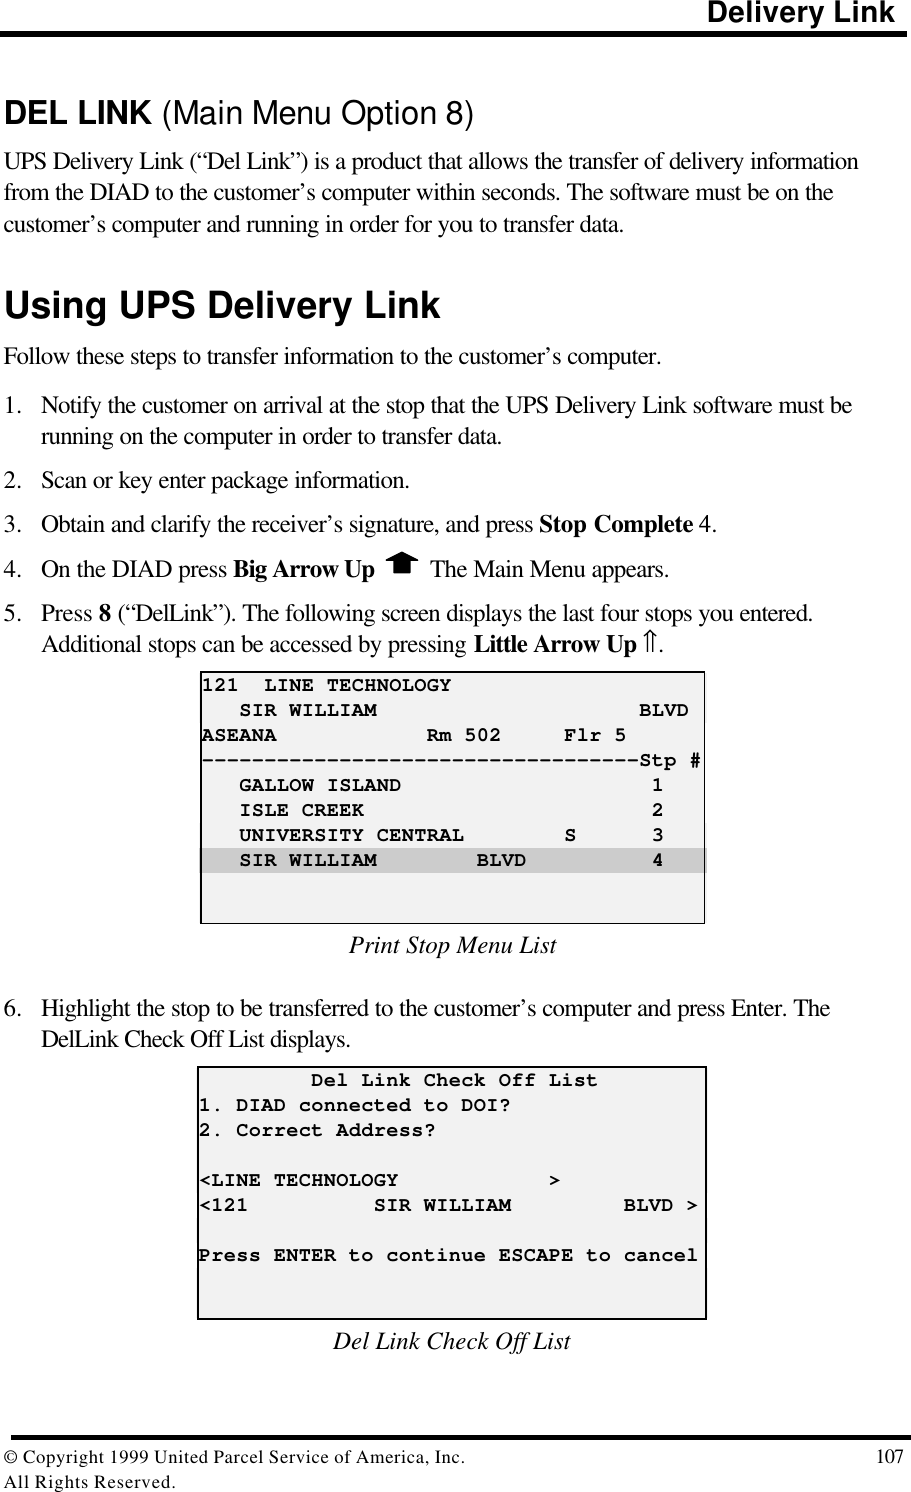                                                                                           Delivery Link© Copyright 1999 United Parcel Service of America, Inc.  107All Rights Reserved.DEL LINK (Main Menu Option 8)UPS Delivery Link (“Del Link”) is a product that allows the transfer of delivery informationfrom the DIAD to the customer’s computer within seconds. The software must be on thecustomer’s computer and running in order for you to transfer data.Using UPS Delivery LinkFollow these steps to transfer information to the customer’s computer.1. Notify the customer on arrival at the stop that the UPS Delivery Link software must berunning on the computer in order to transfer data.2. Scan or key enter package information.3. Obtain and clarify the receiver’s signature, and press Stop Complete 4.4. On the DIAD press Big Arrow Up   The Main Menu appears.5. Press 8 (“DelLink”). The following screen displays the last four stops you entered.Additional stops can be accessed by pressing Little Arrow Up ⇑.121  LINE TECHNOLOGY   SIR WILLIAM                     BLVDASEANA            Rm 502     Flr 5-----------------------------------Stp #   GALLOW ISLAND                    1   ISLE CREEK                       2   UNIVERSITY CENTRAL        S      3   SIR WILLIAM        BLVD          4Print Stop Menu List6. Highlight the stop to be transferred to the customer’s computer and press Enter. TheDelLink Check Off List displays.         Del Link Check Off List1. DIAD connected to DOI?2. Correct Address?&lt;LINE TECHNOLOGY            &gt;&lt;121          SIR WILLIAM         BLVD &gt;Press ENTER to continue ESCAPE to cancelDel Link Check Off List